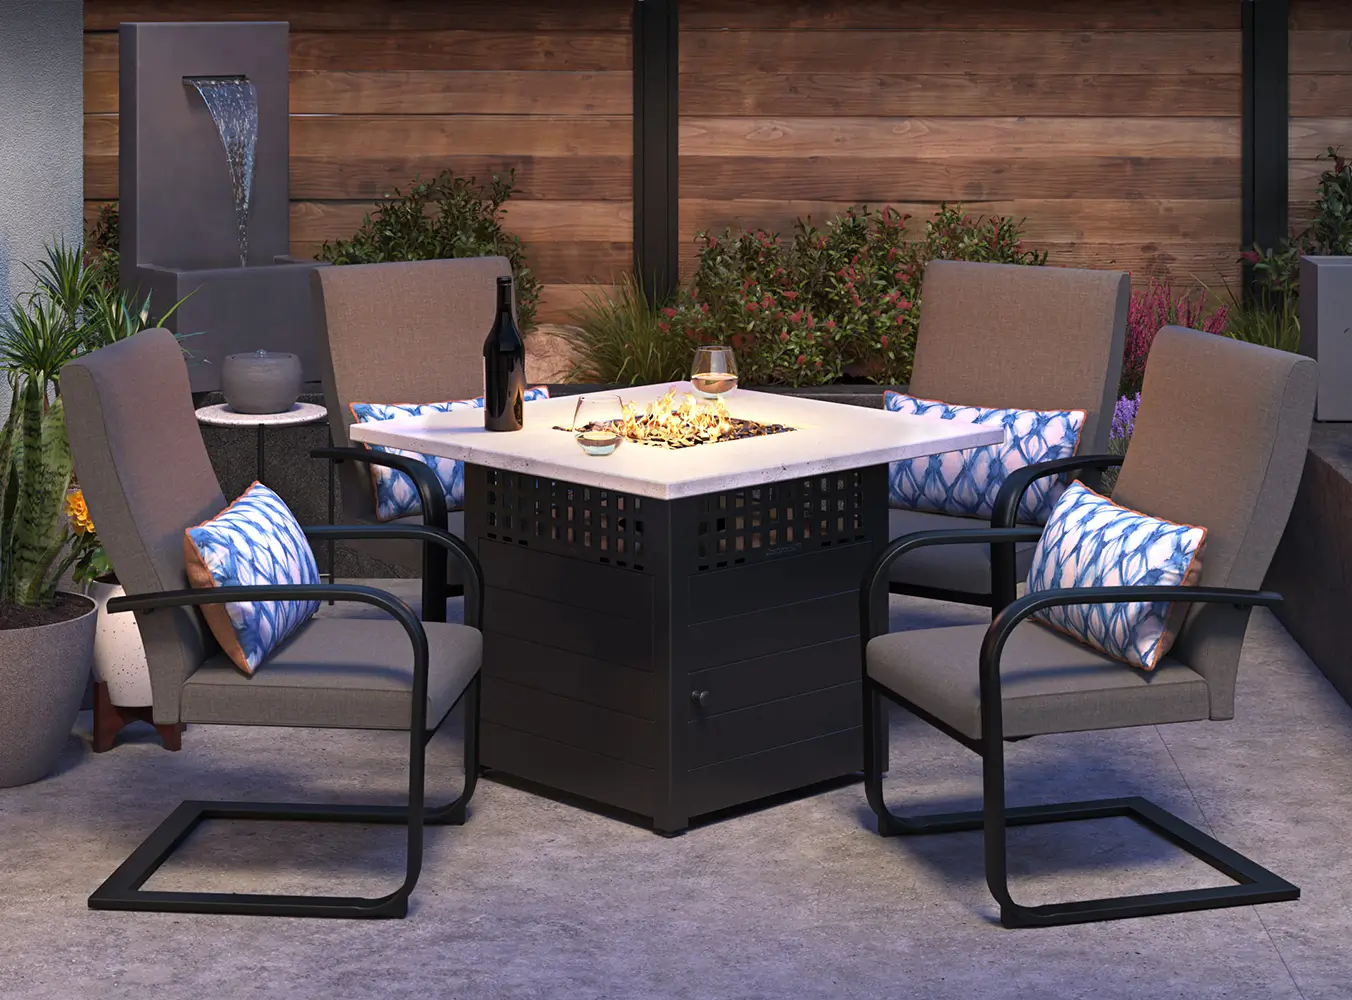 How Our Creative Touch Enhanced Lowe's Home Outdoor Improvement (Patio) Market